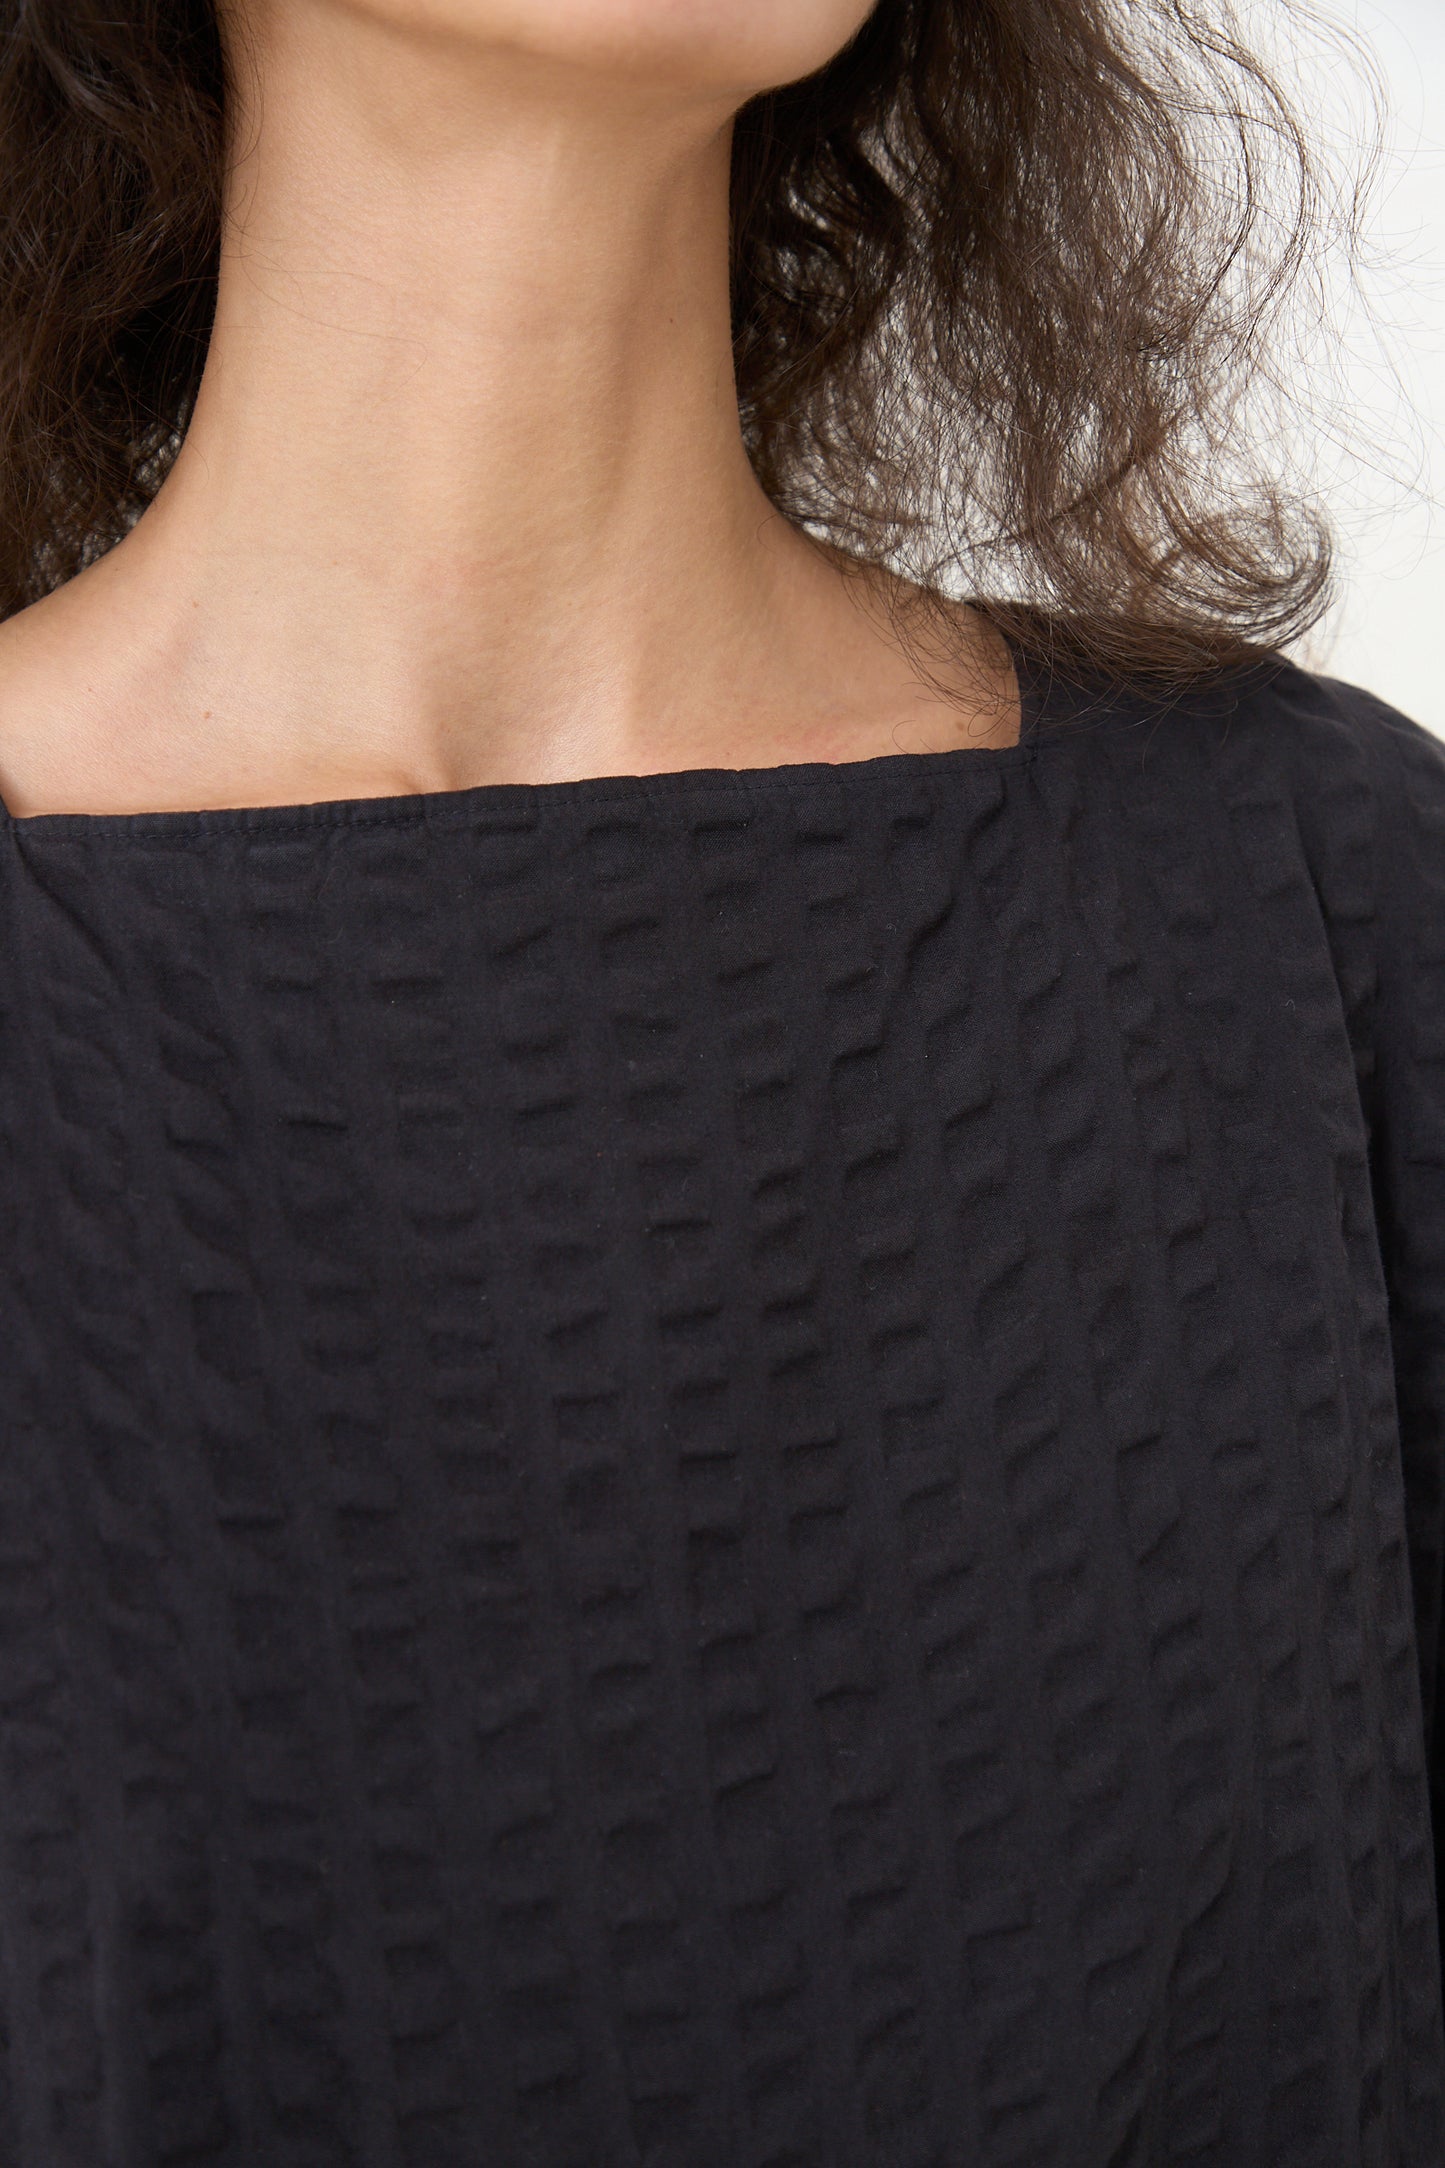 A close-up image showing the lower face and neckline of a person wearing a Cotton Seersucker Tradi Dress in Ink Black designed by Black Crane, Los Angeles.